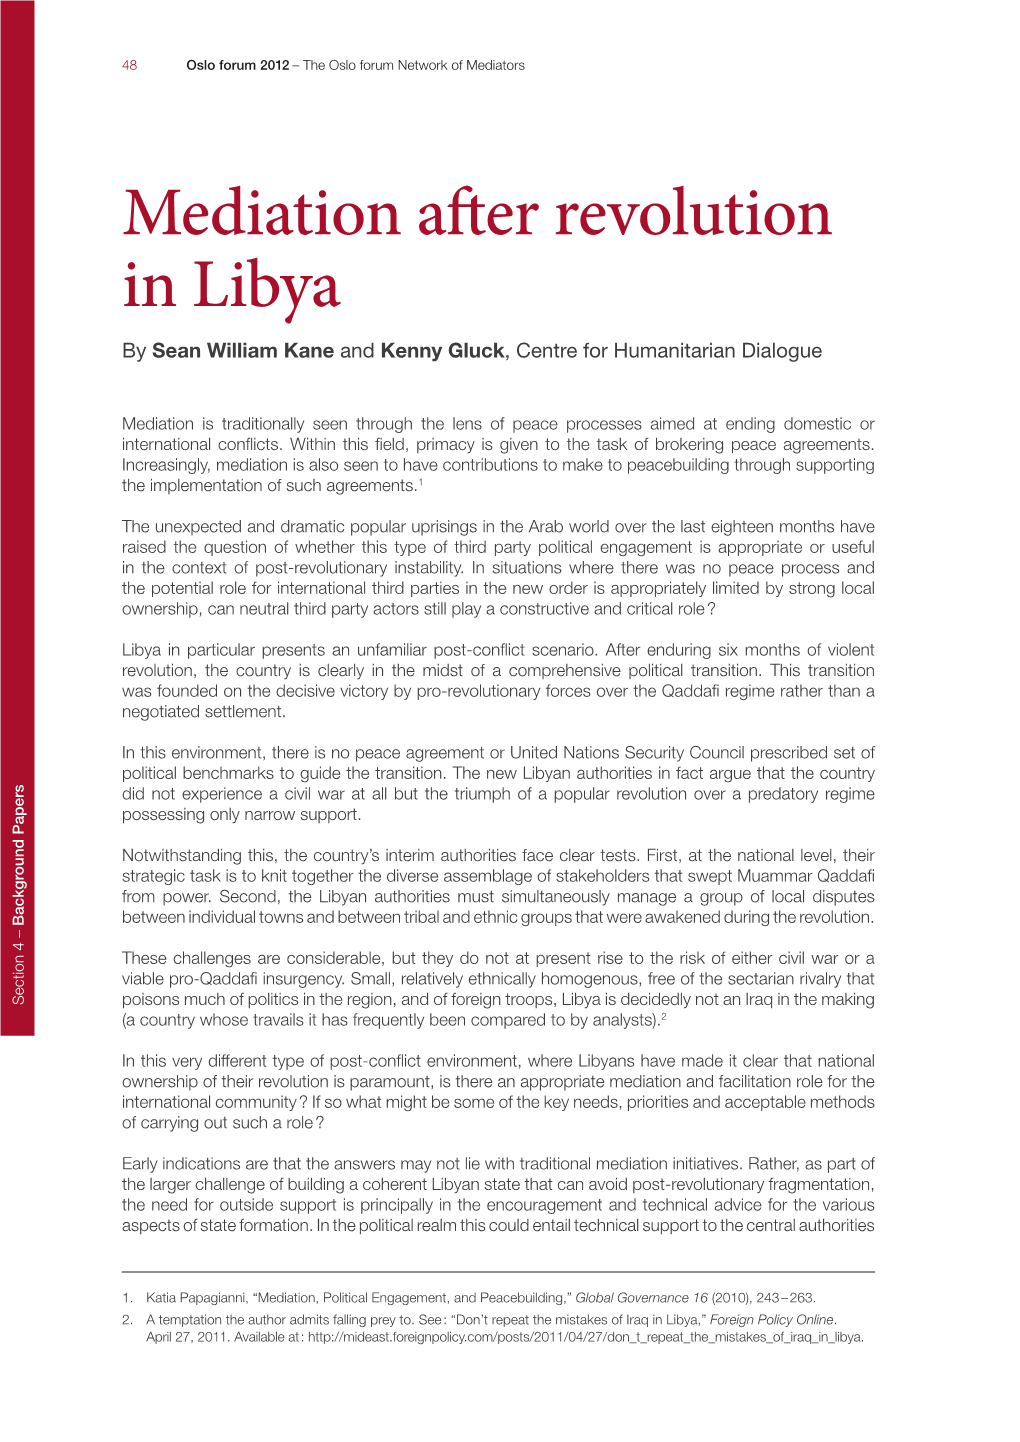 Mediation After Revolution in Libya by Sean William Kane and Kenny Gluck, Centre for Humanitarian Dialogue